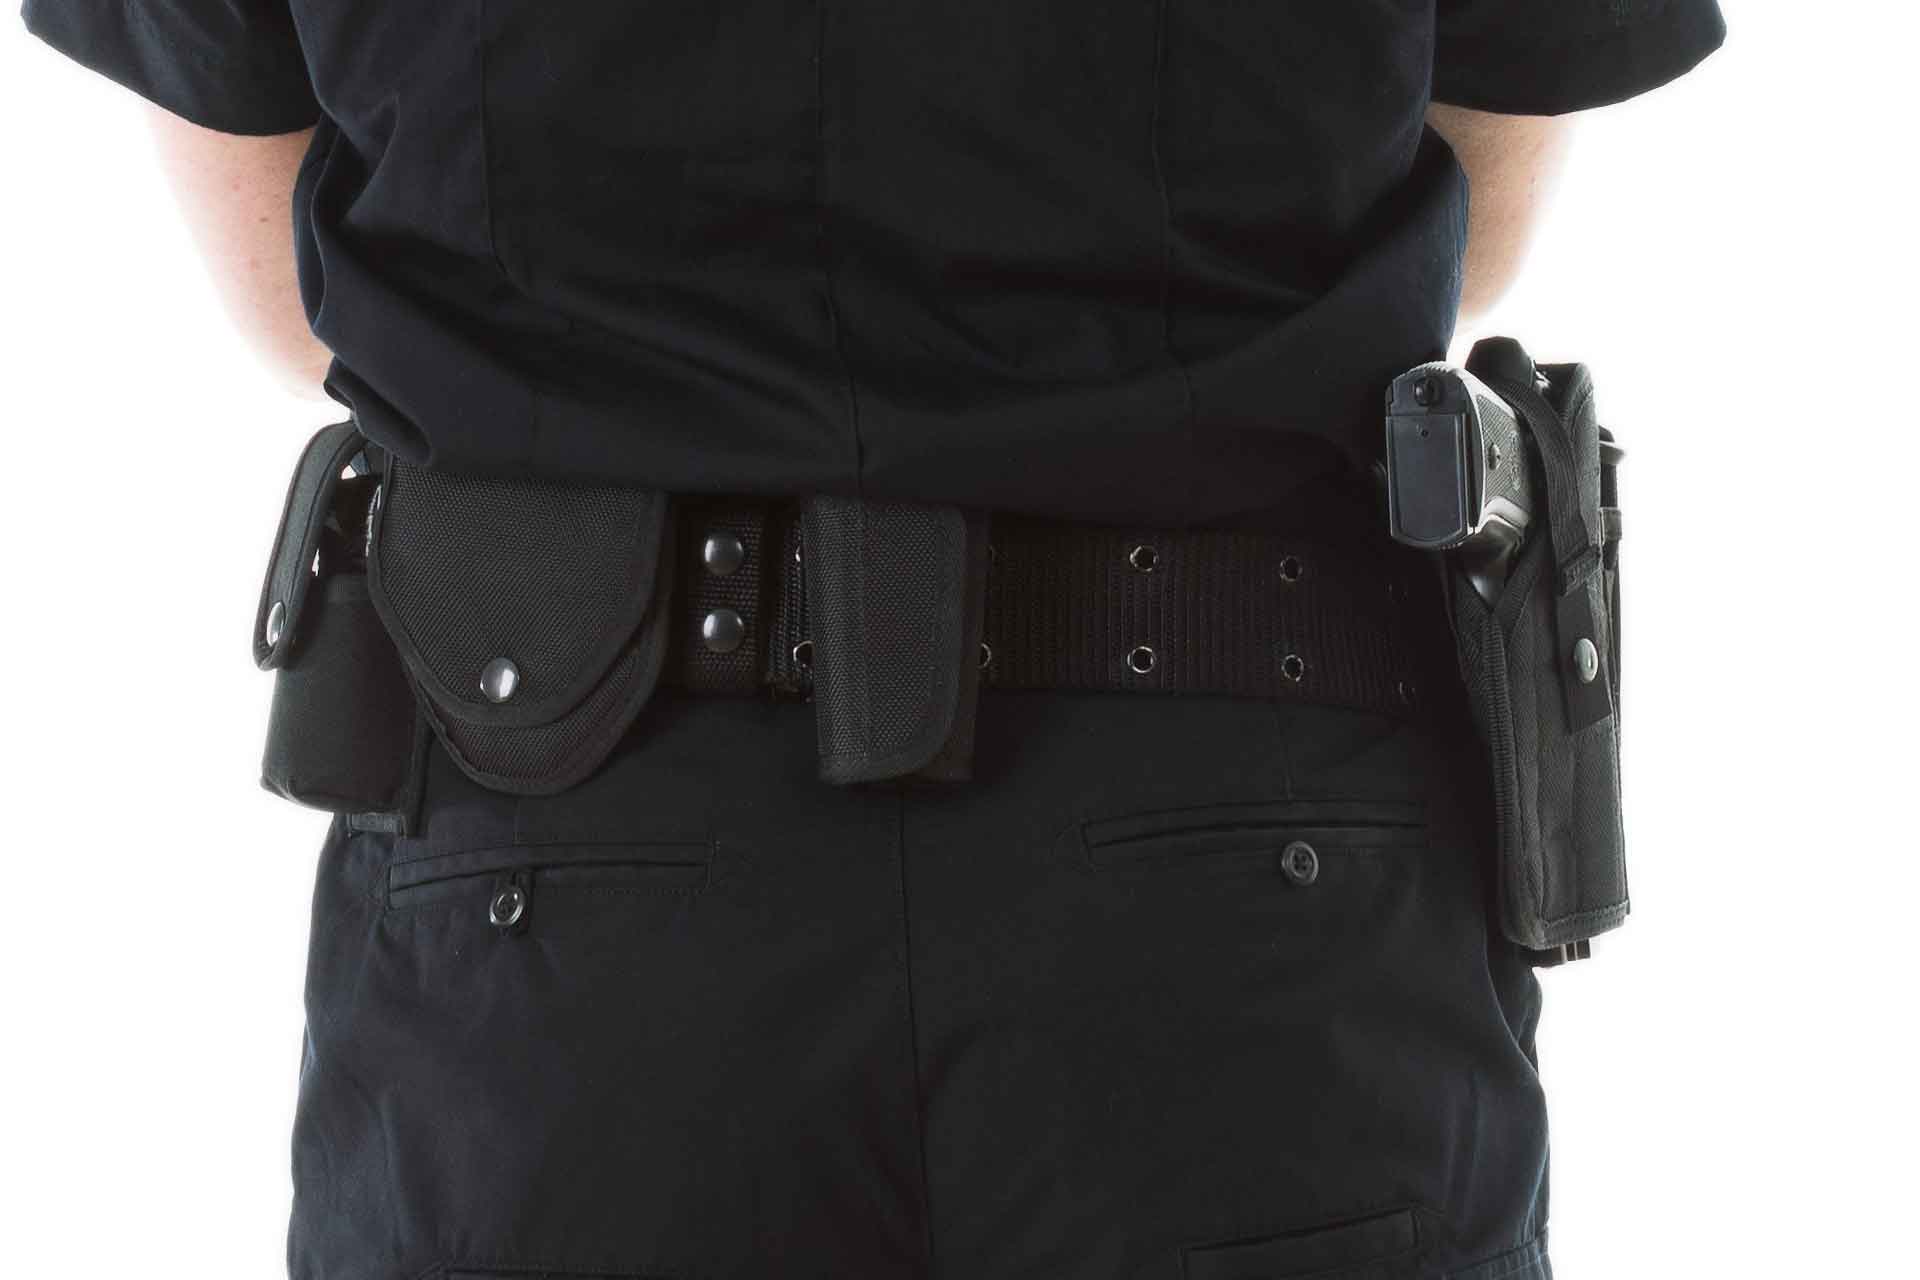 IV. Types of Holsters Suitable for Professional Use